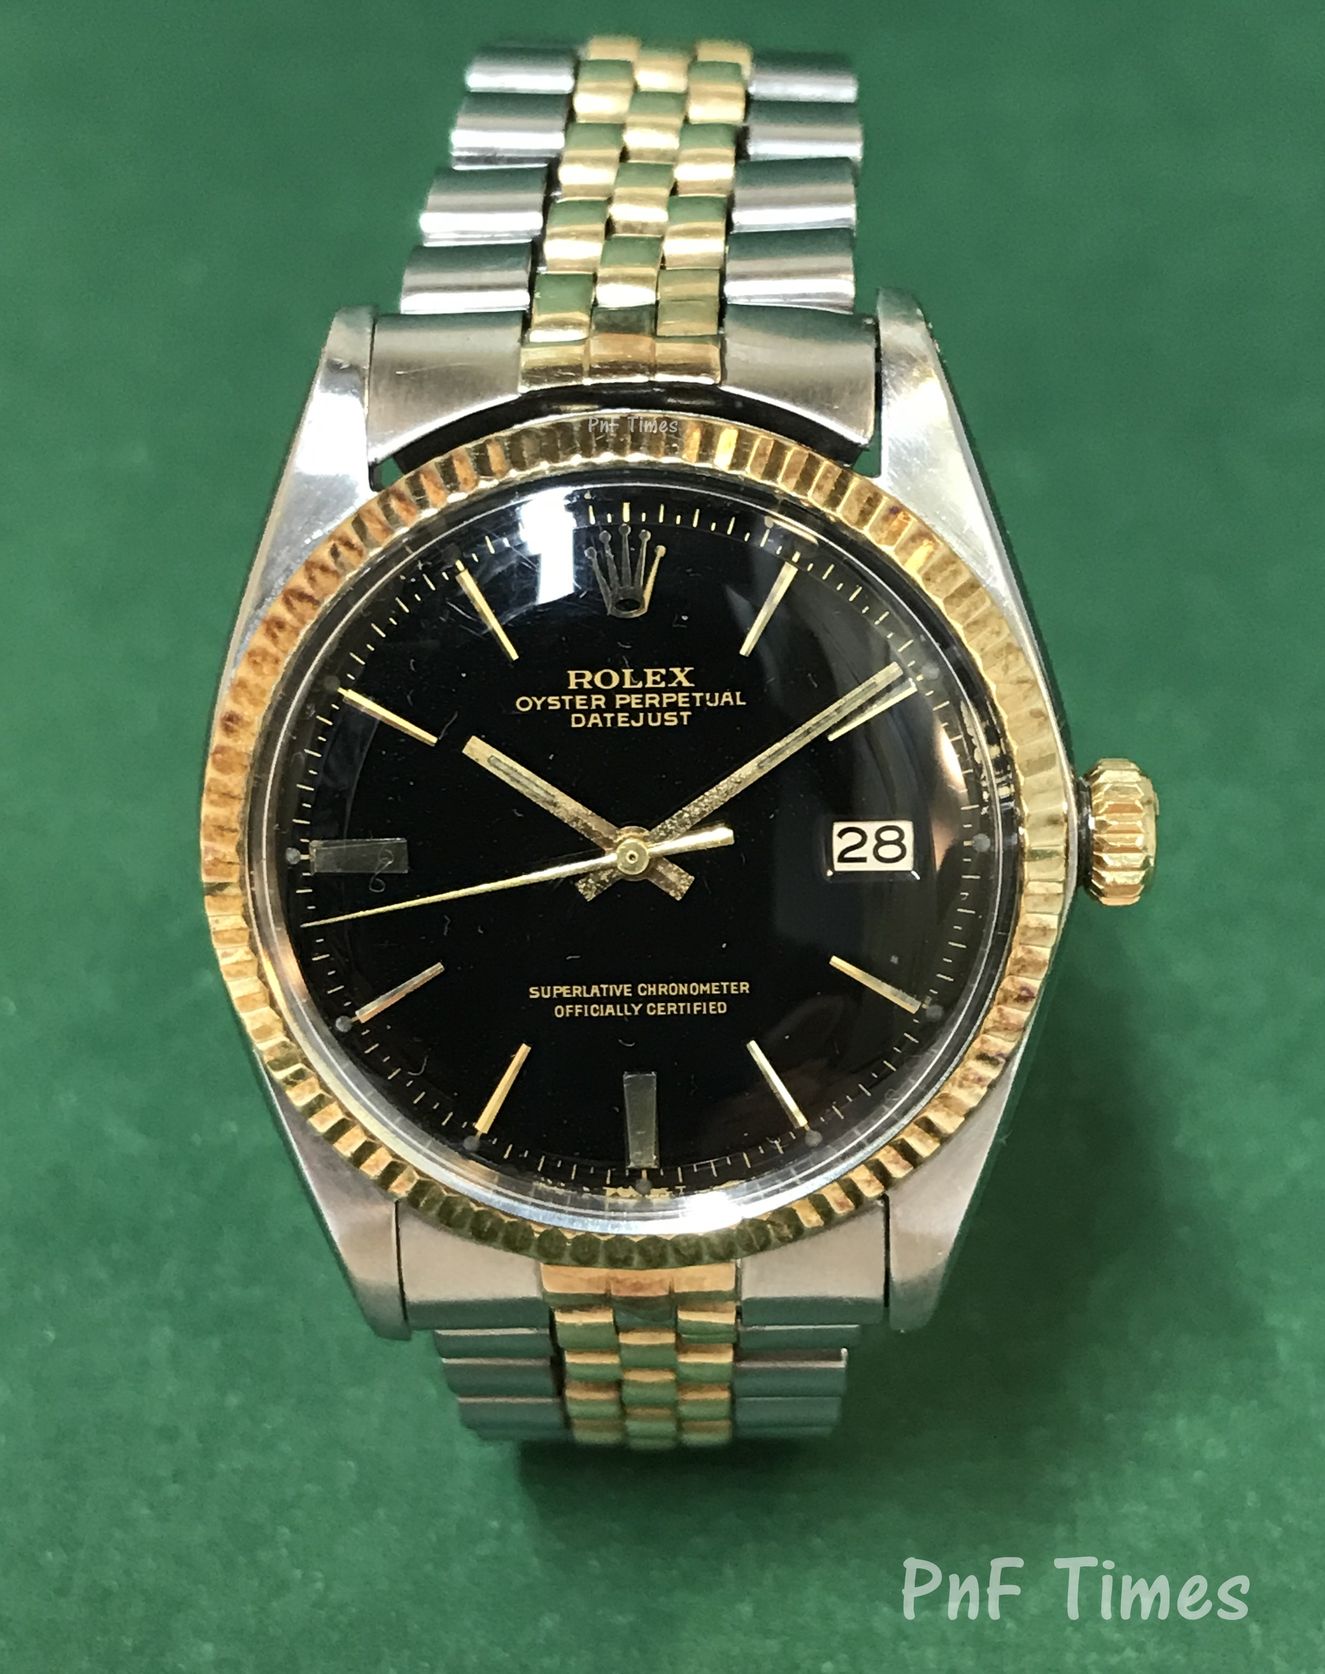 Rolex 1601 Oyster Perpetual Datejust 